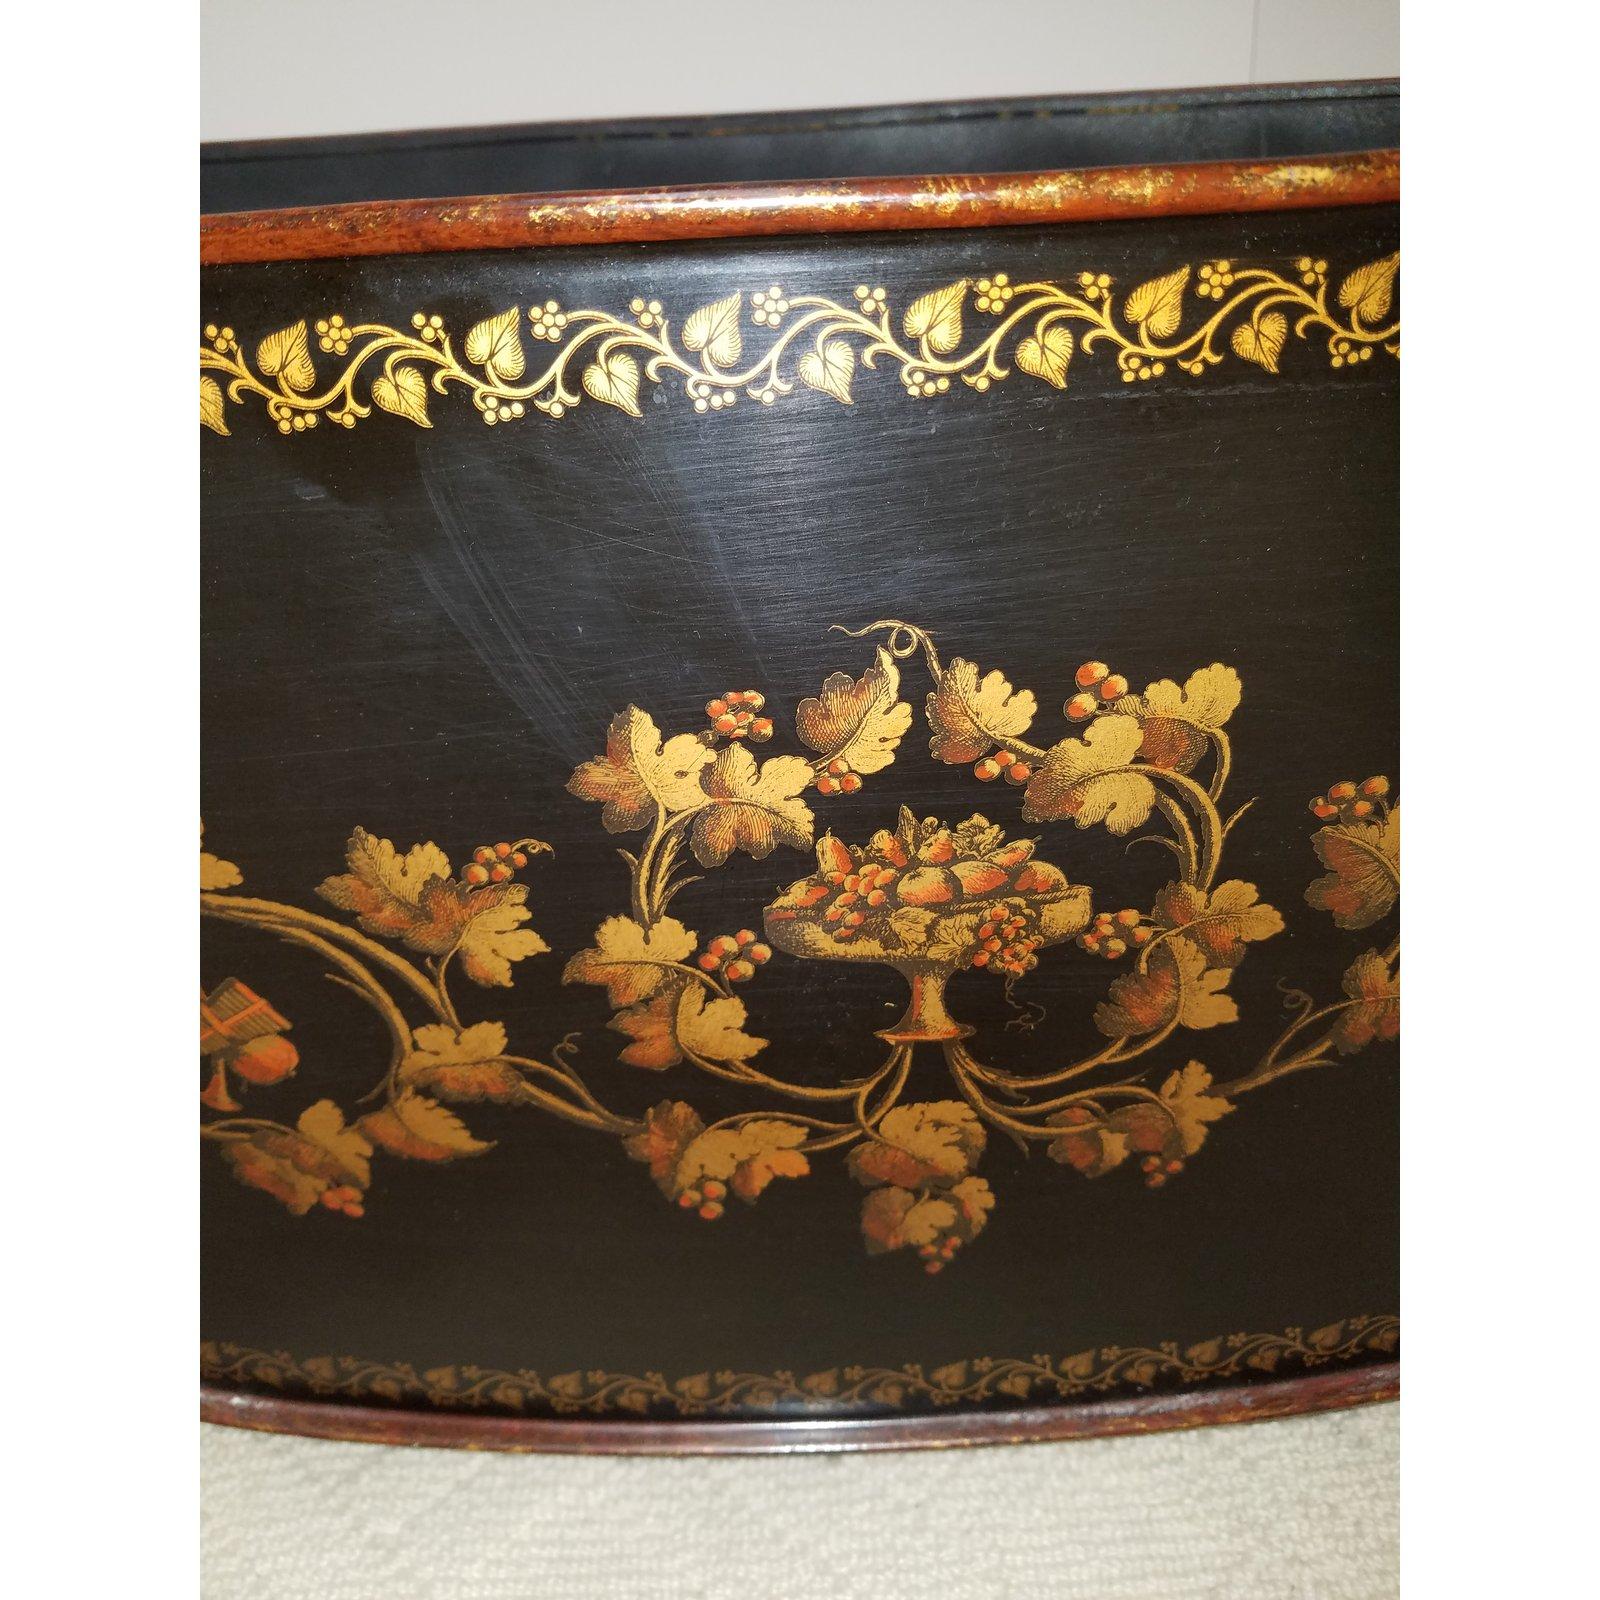 Hand-Painted Grand Scale English Regency Oval Tole Planter with Lion Ring Handles on Castors